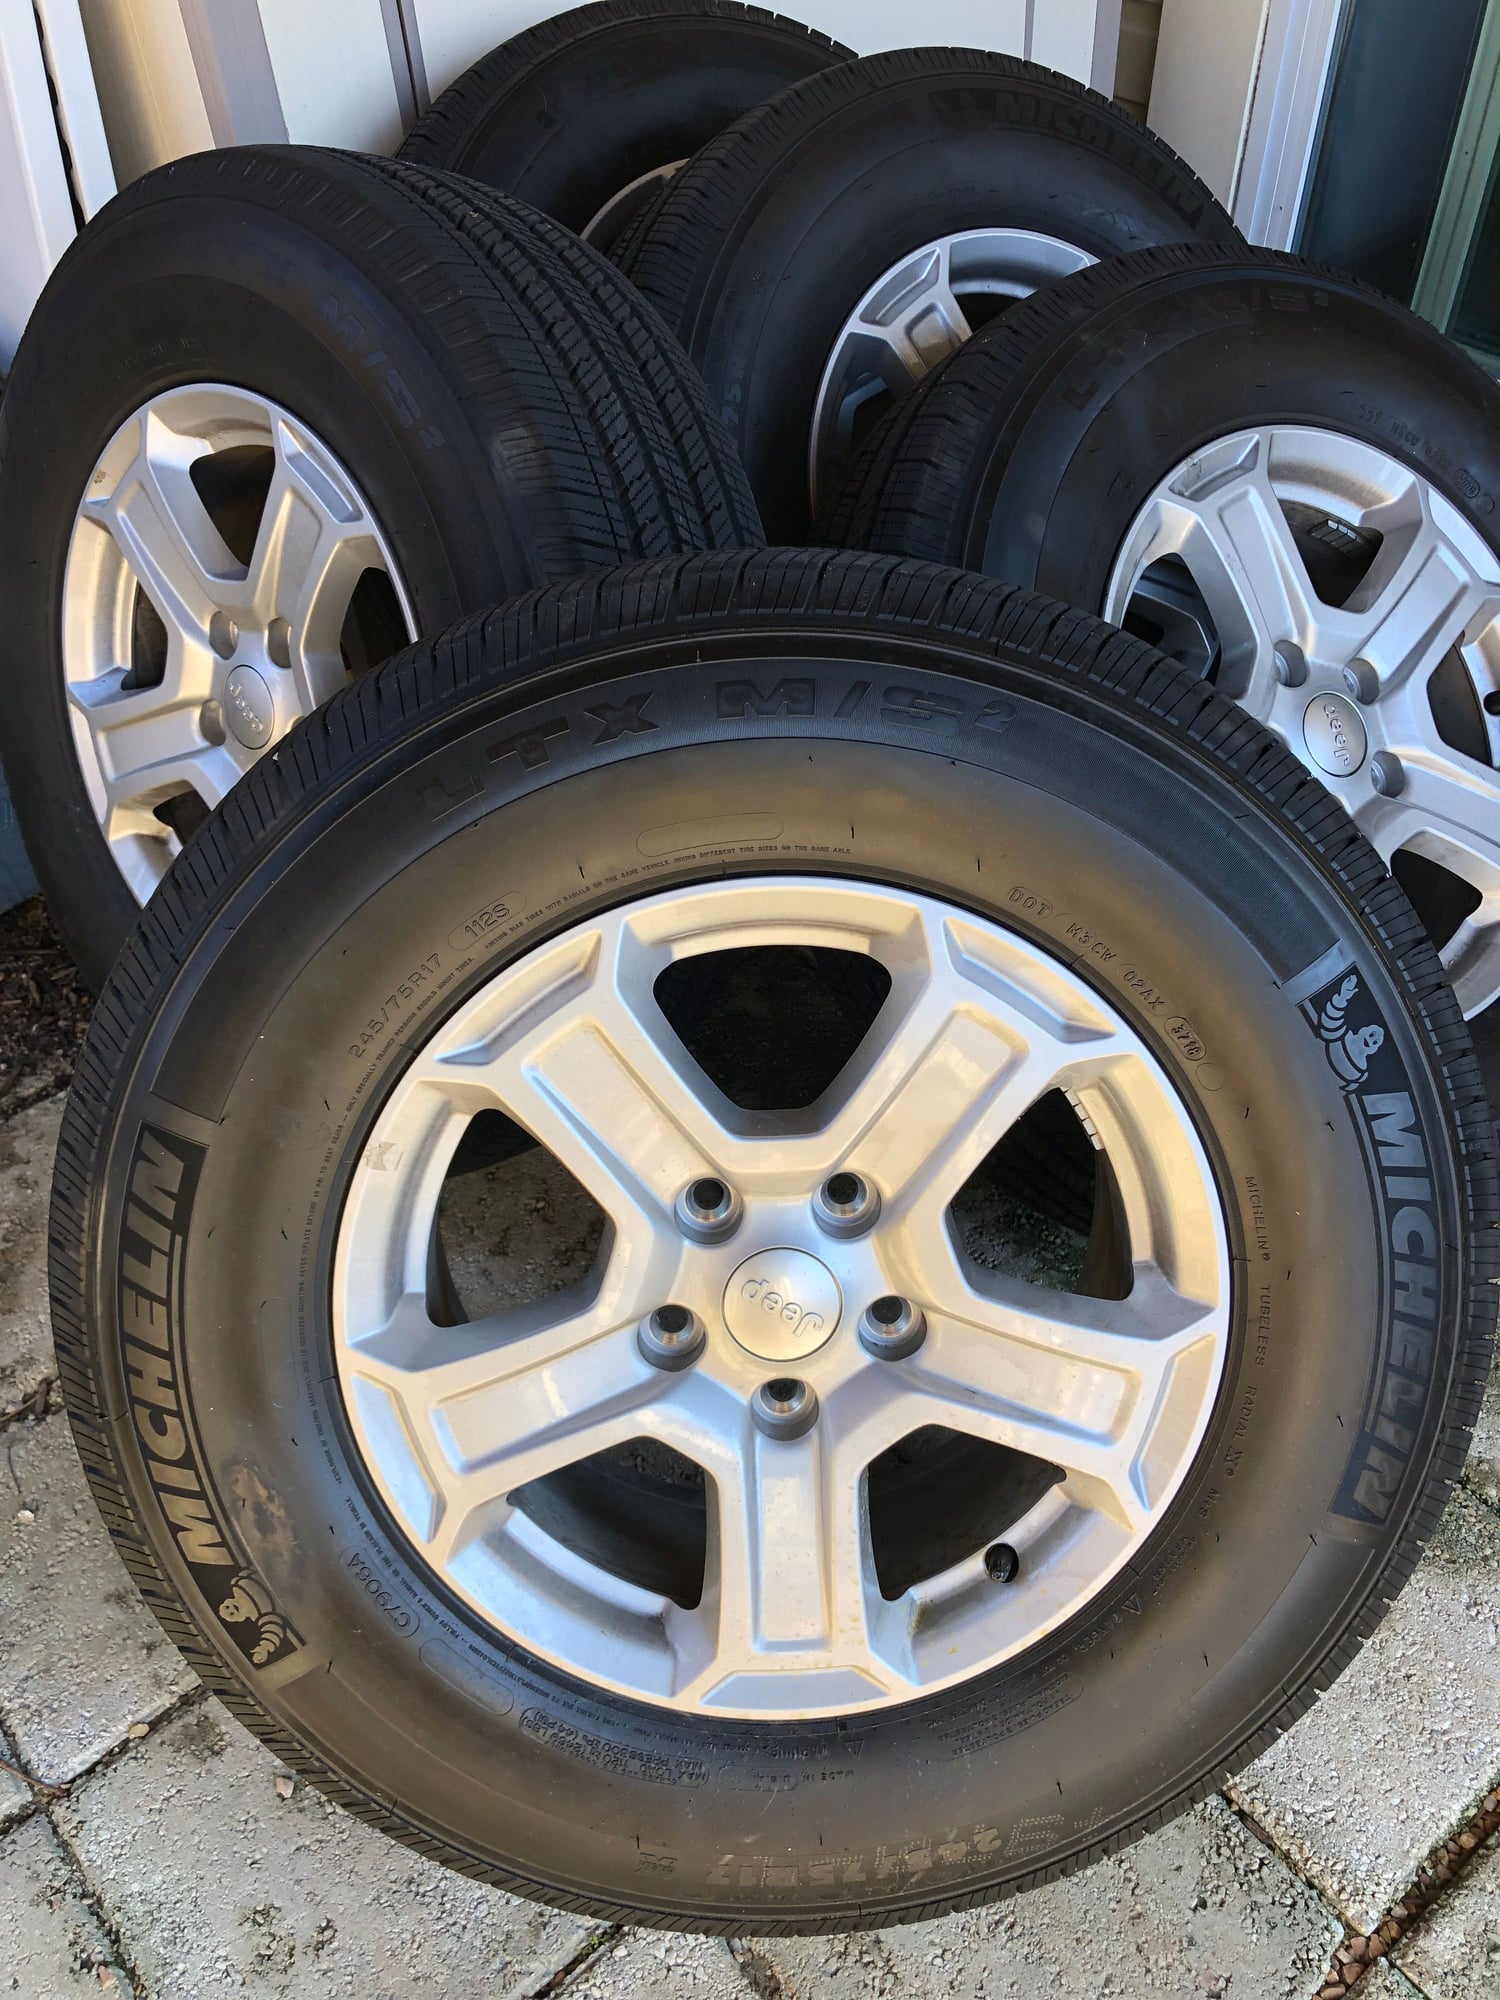 Wheels and Tires/Axles - 2018 jl wheels and tires with tpms and logs - Used - 2009 to 2019 Jeep Wrangler - Alexandria, VA 22315, United States